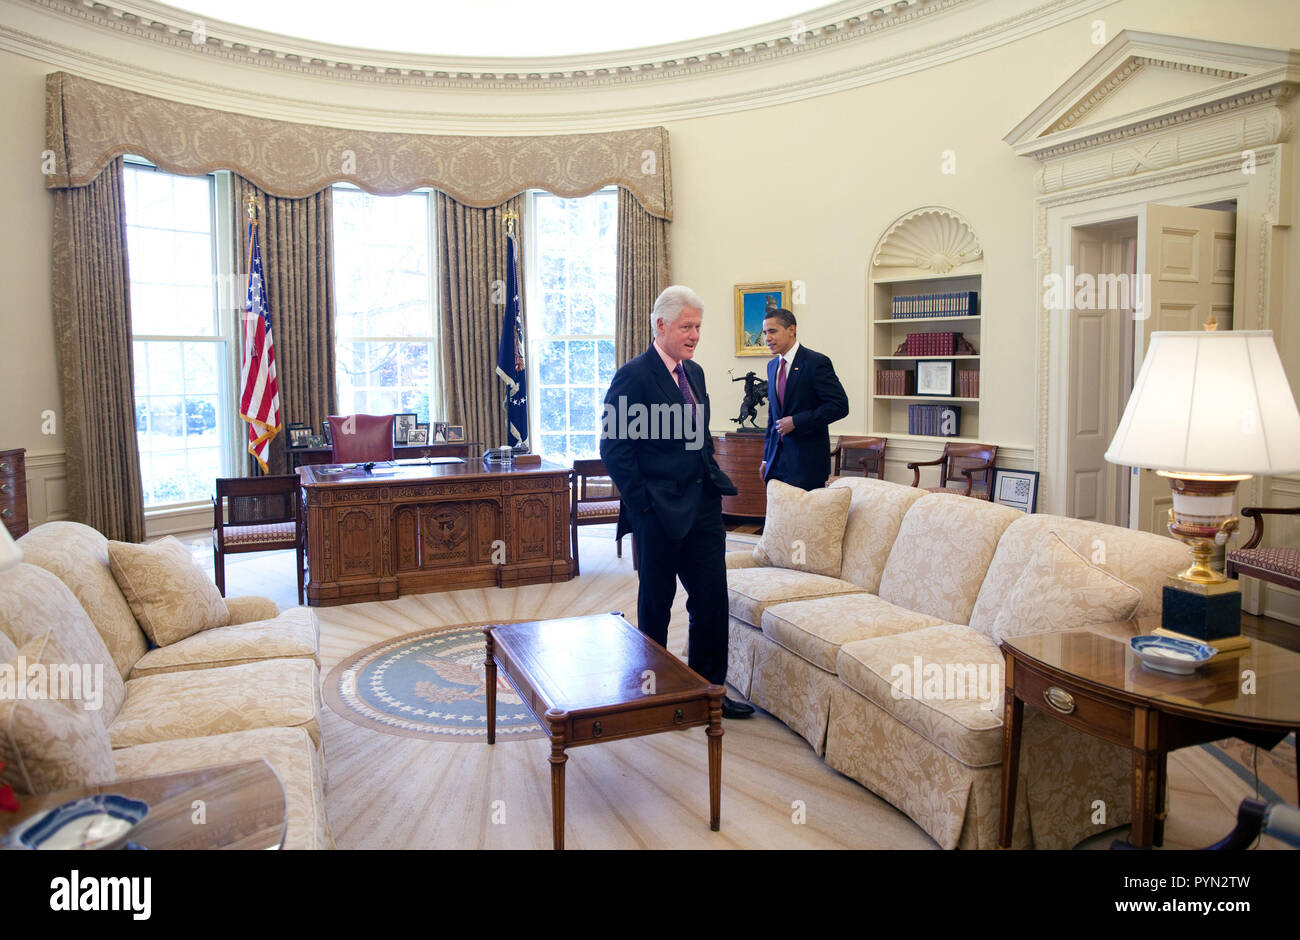 President Barack Obama meets with President Clinton in the Oval Office 4/21/09 Stock Photo